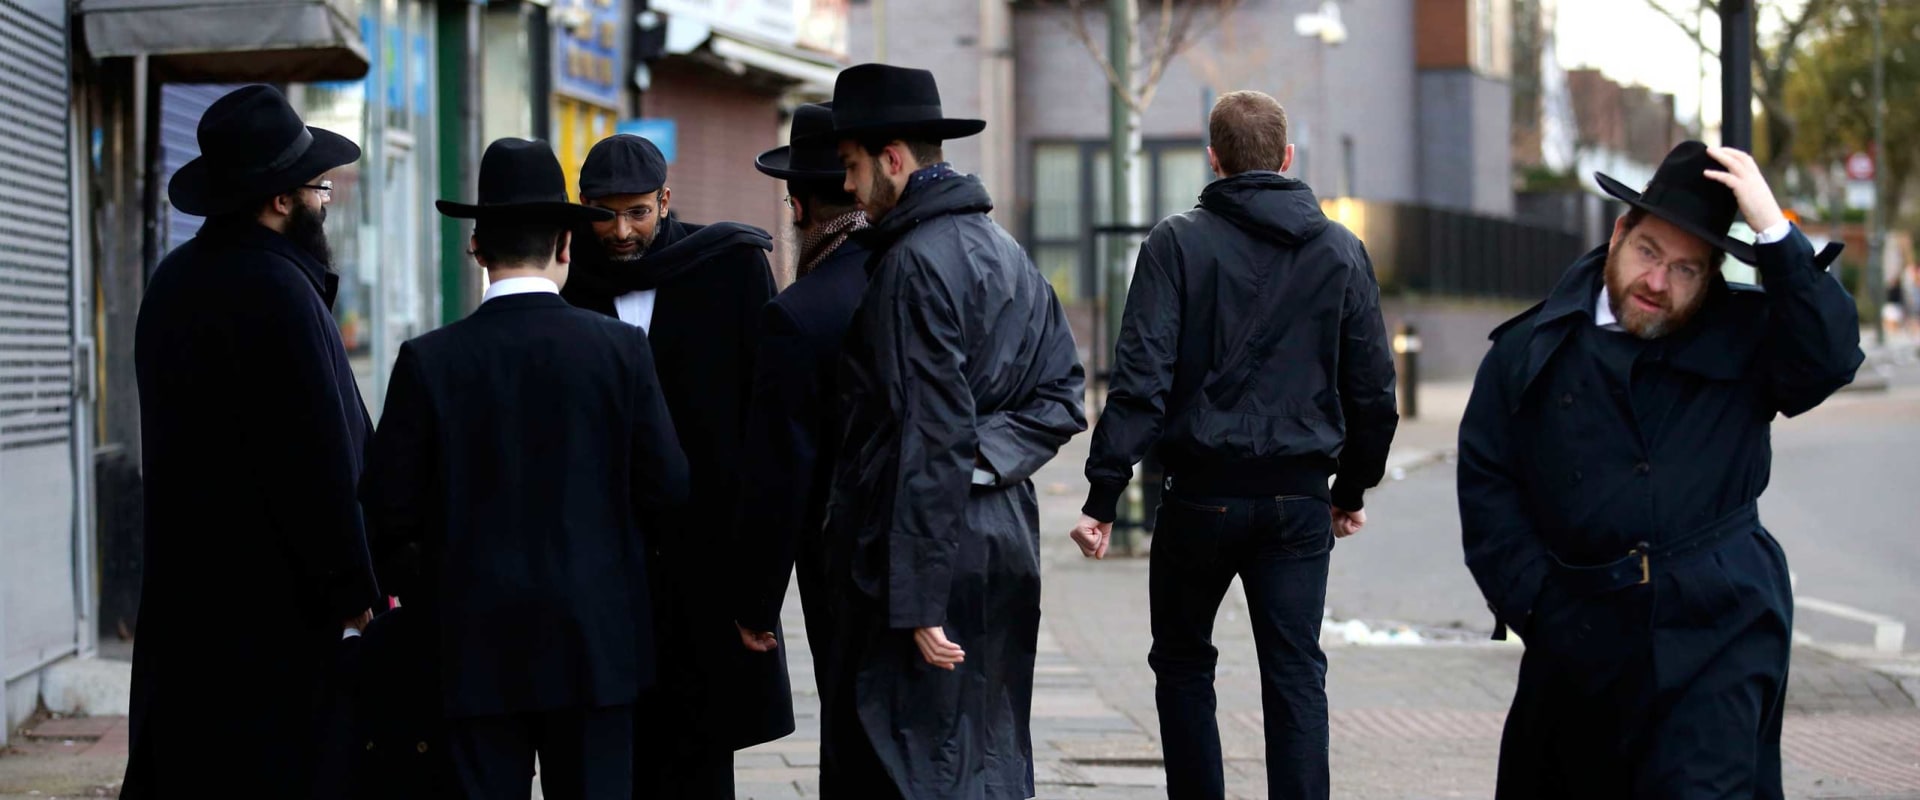 The Impact of Antisemitism on the Jewish Community in London: An Expert's Perspective